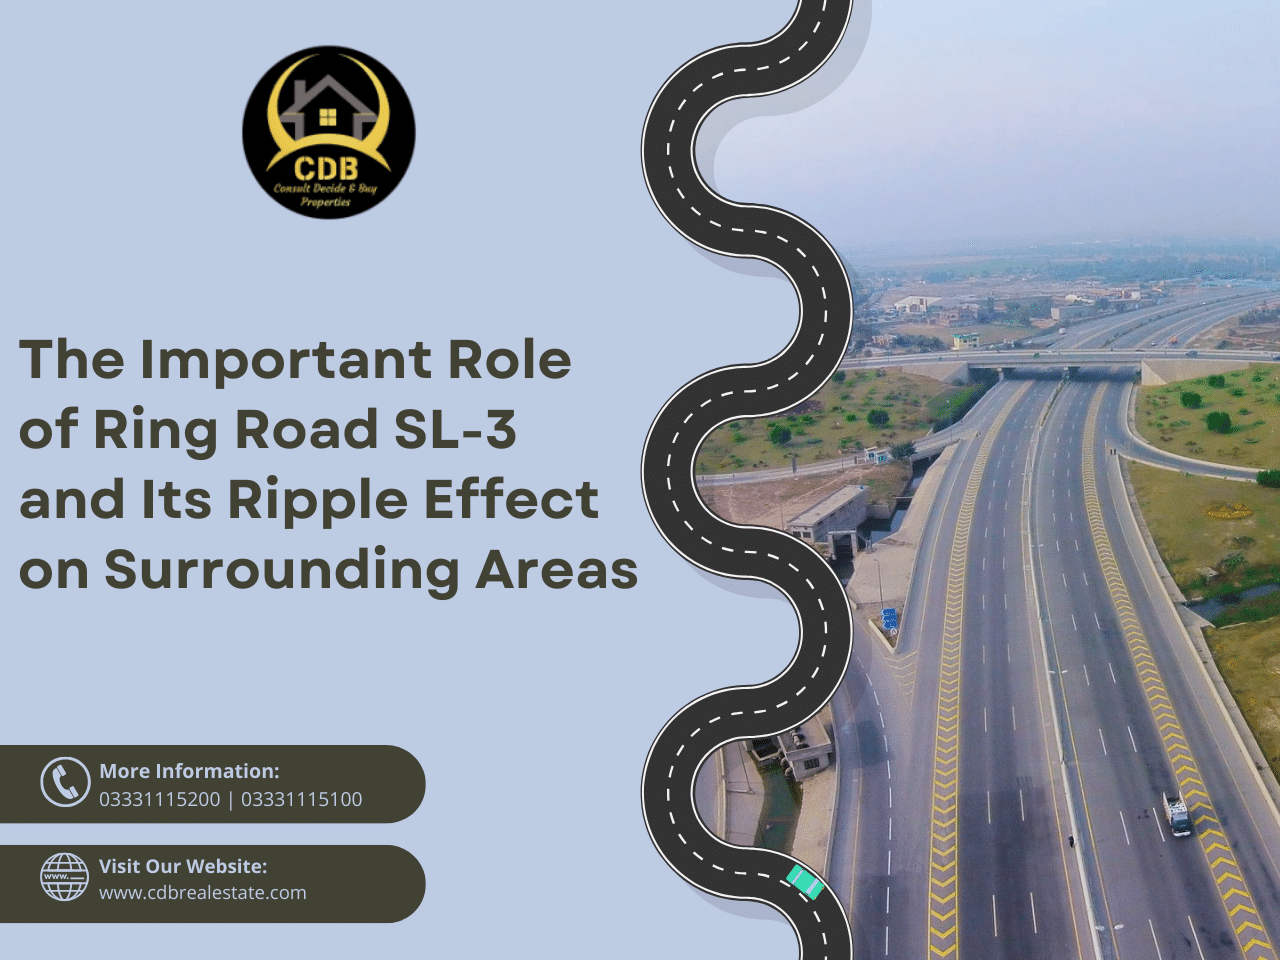 The Important Role of Ring Road SL-3 and Its Ripple Effect on Surrounding Areas